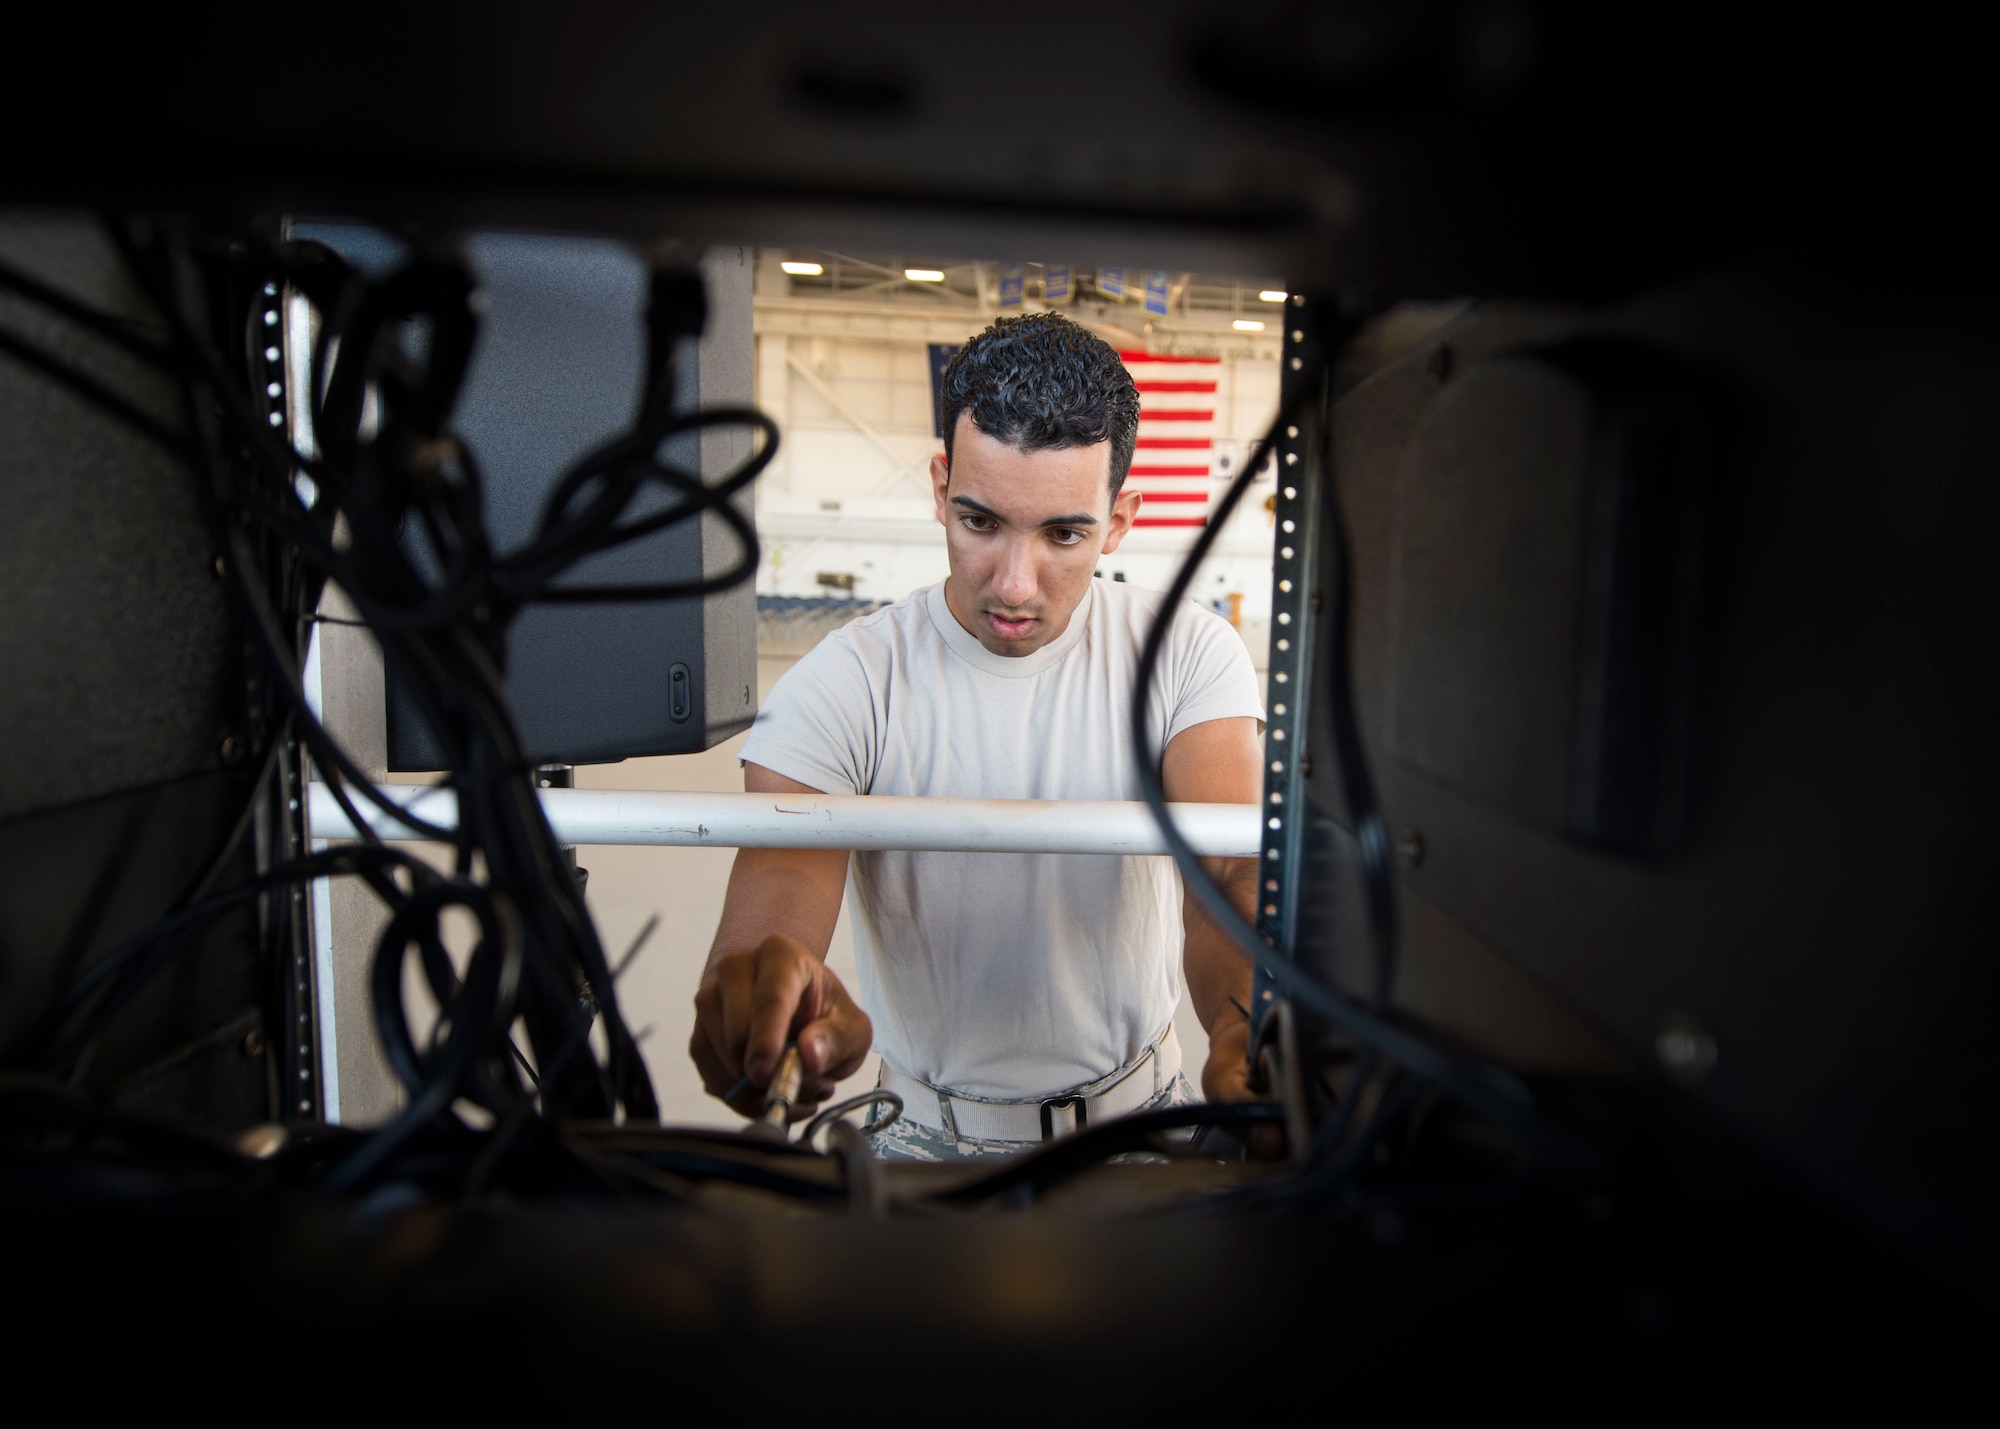 Airman 1st Class Sean Ludwig, a radio frequency systems apprentice with the 1st Special Operations Communications Squadron, sets up a mixer and power amplifier box for a change of command ceremony at the Freedom Hangar on Hurlburt Field, Fla., July 15, 2016. 1st SOCS Airmen provide audio support for different ceremonies and events on base. (U.S. Air Force photo by Senior Airman Krystal M. Garrett)